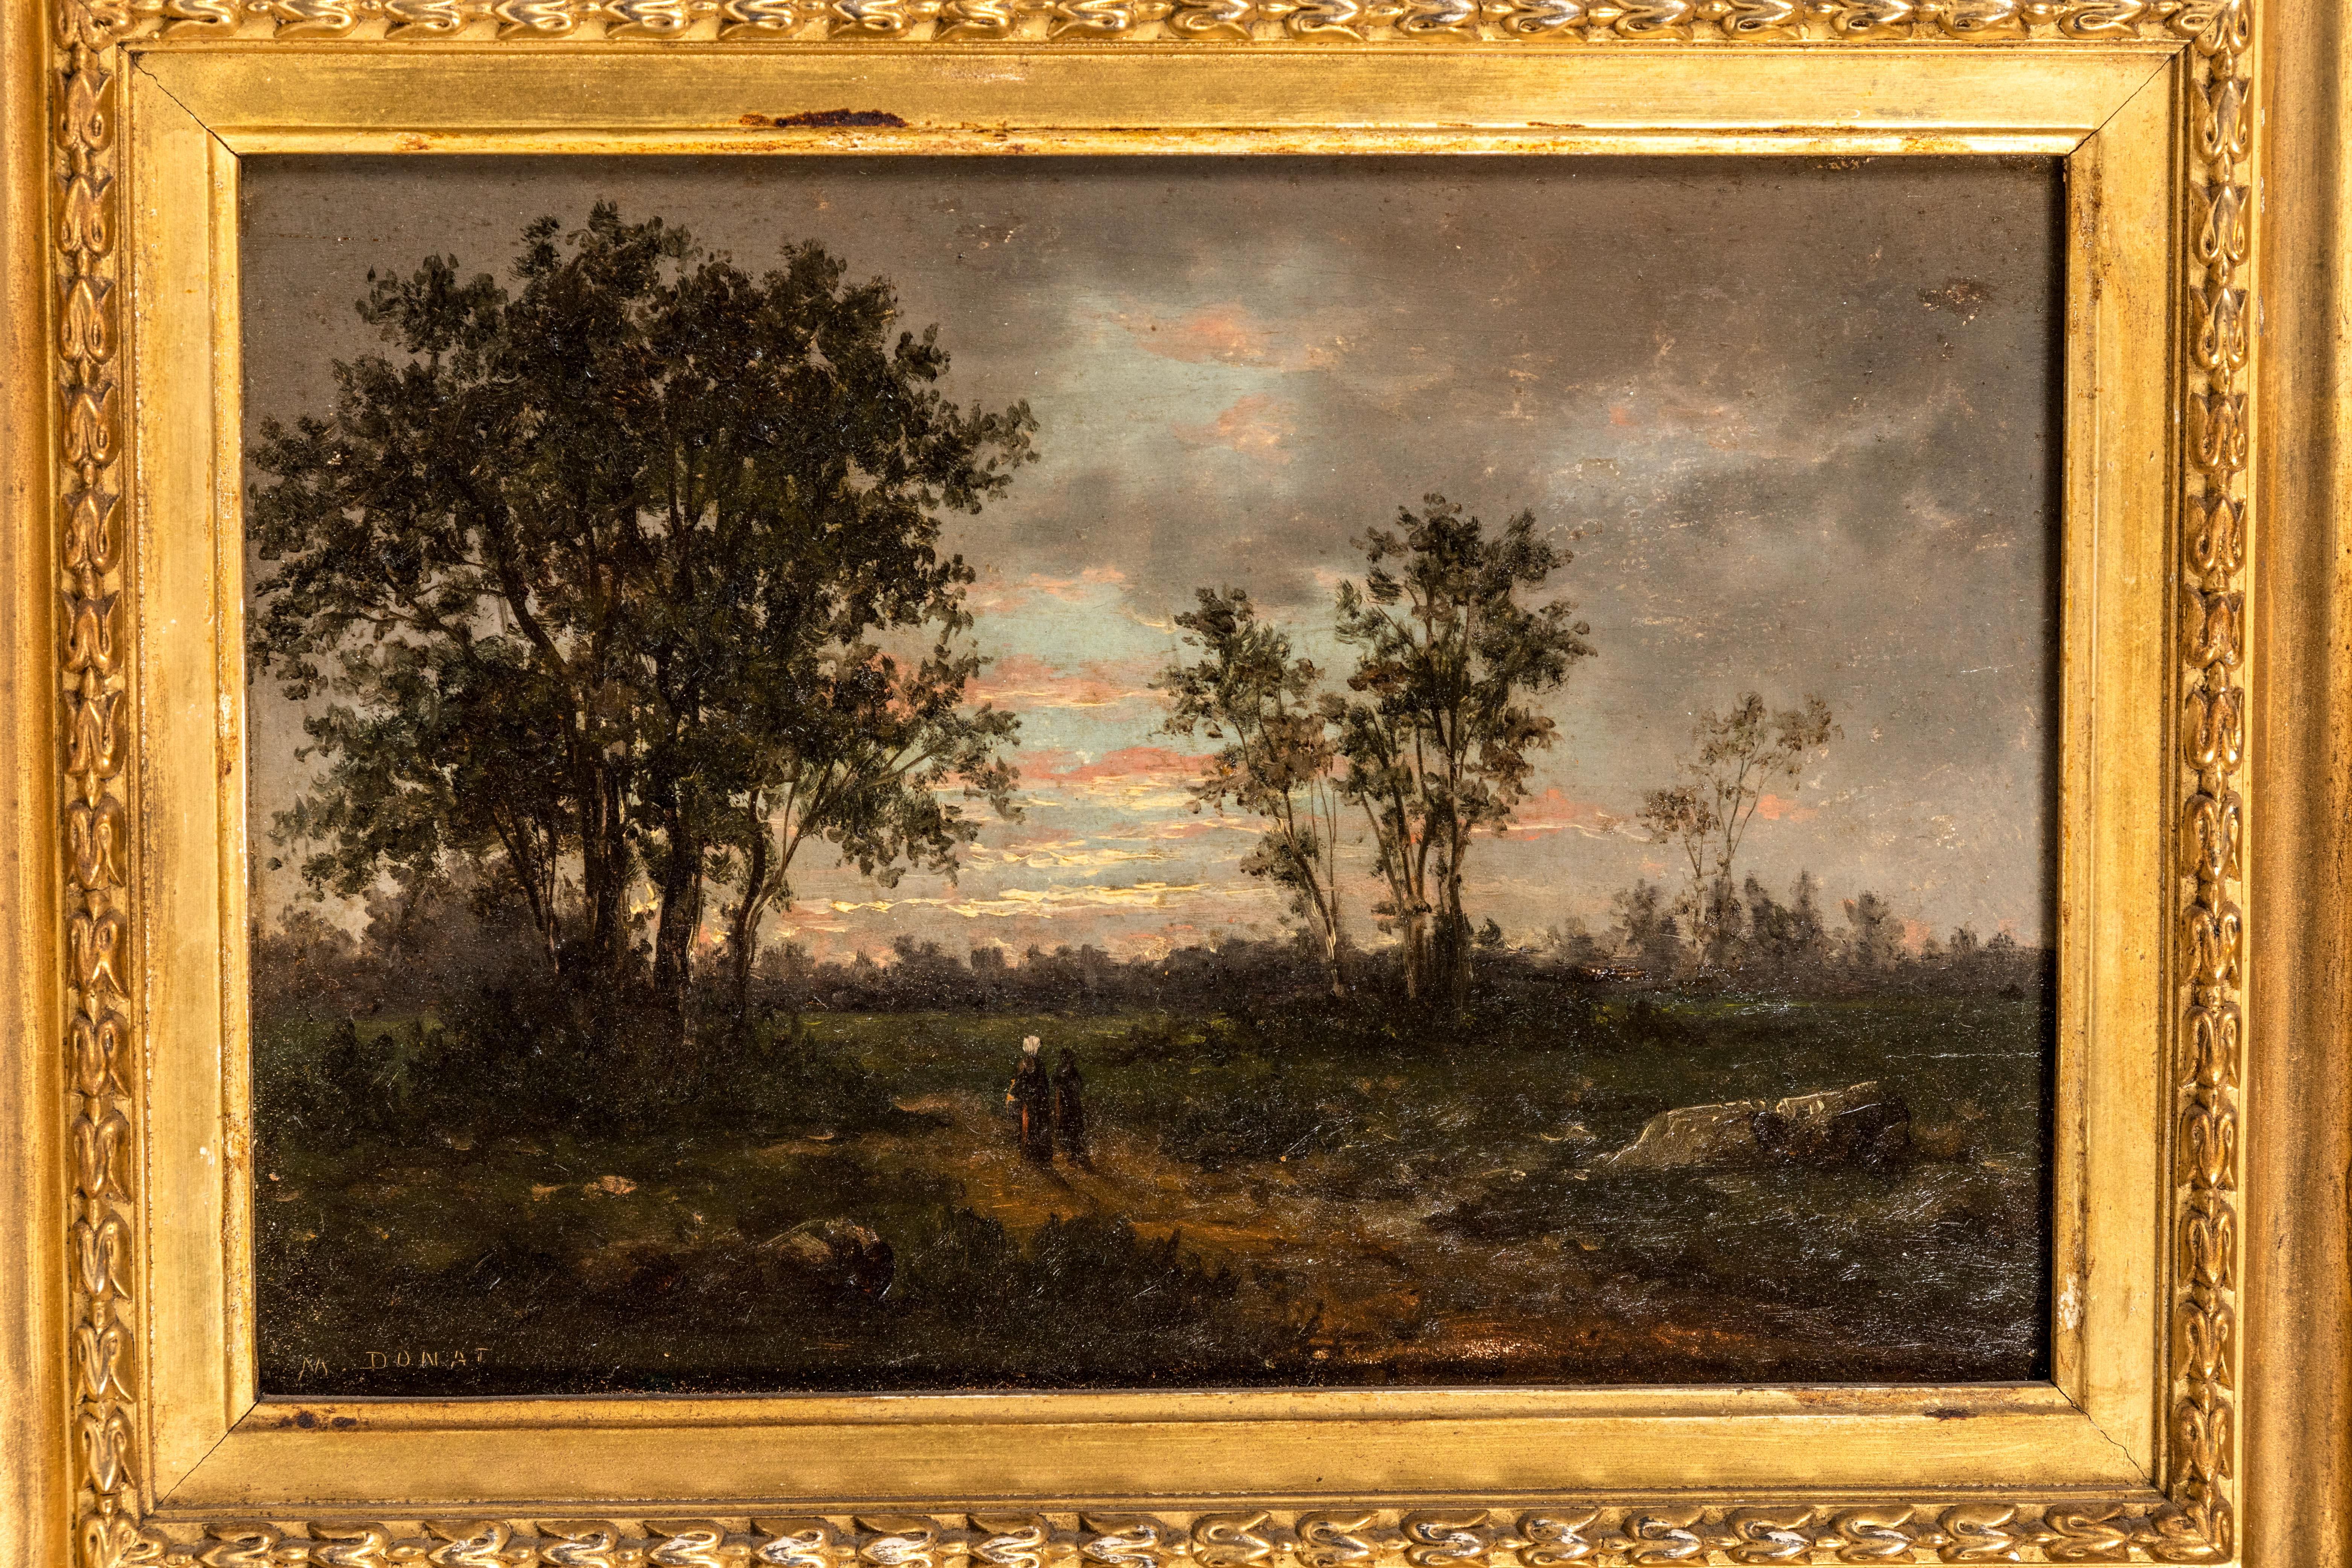 Beautifully rendered, 19th century, oil-on-board, French, Barbizon-school painting of figures in a landscape - signed, “M. Donat”, lower left, and inscribed by the artist on the reverse. Held in a richly hand carved, gessoed, and gilded frame.